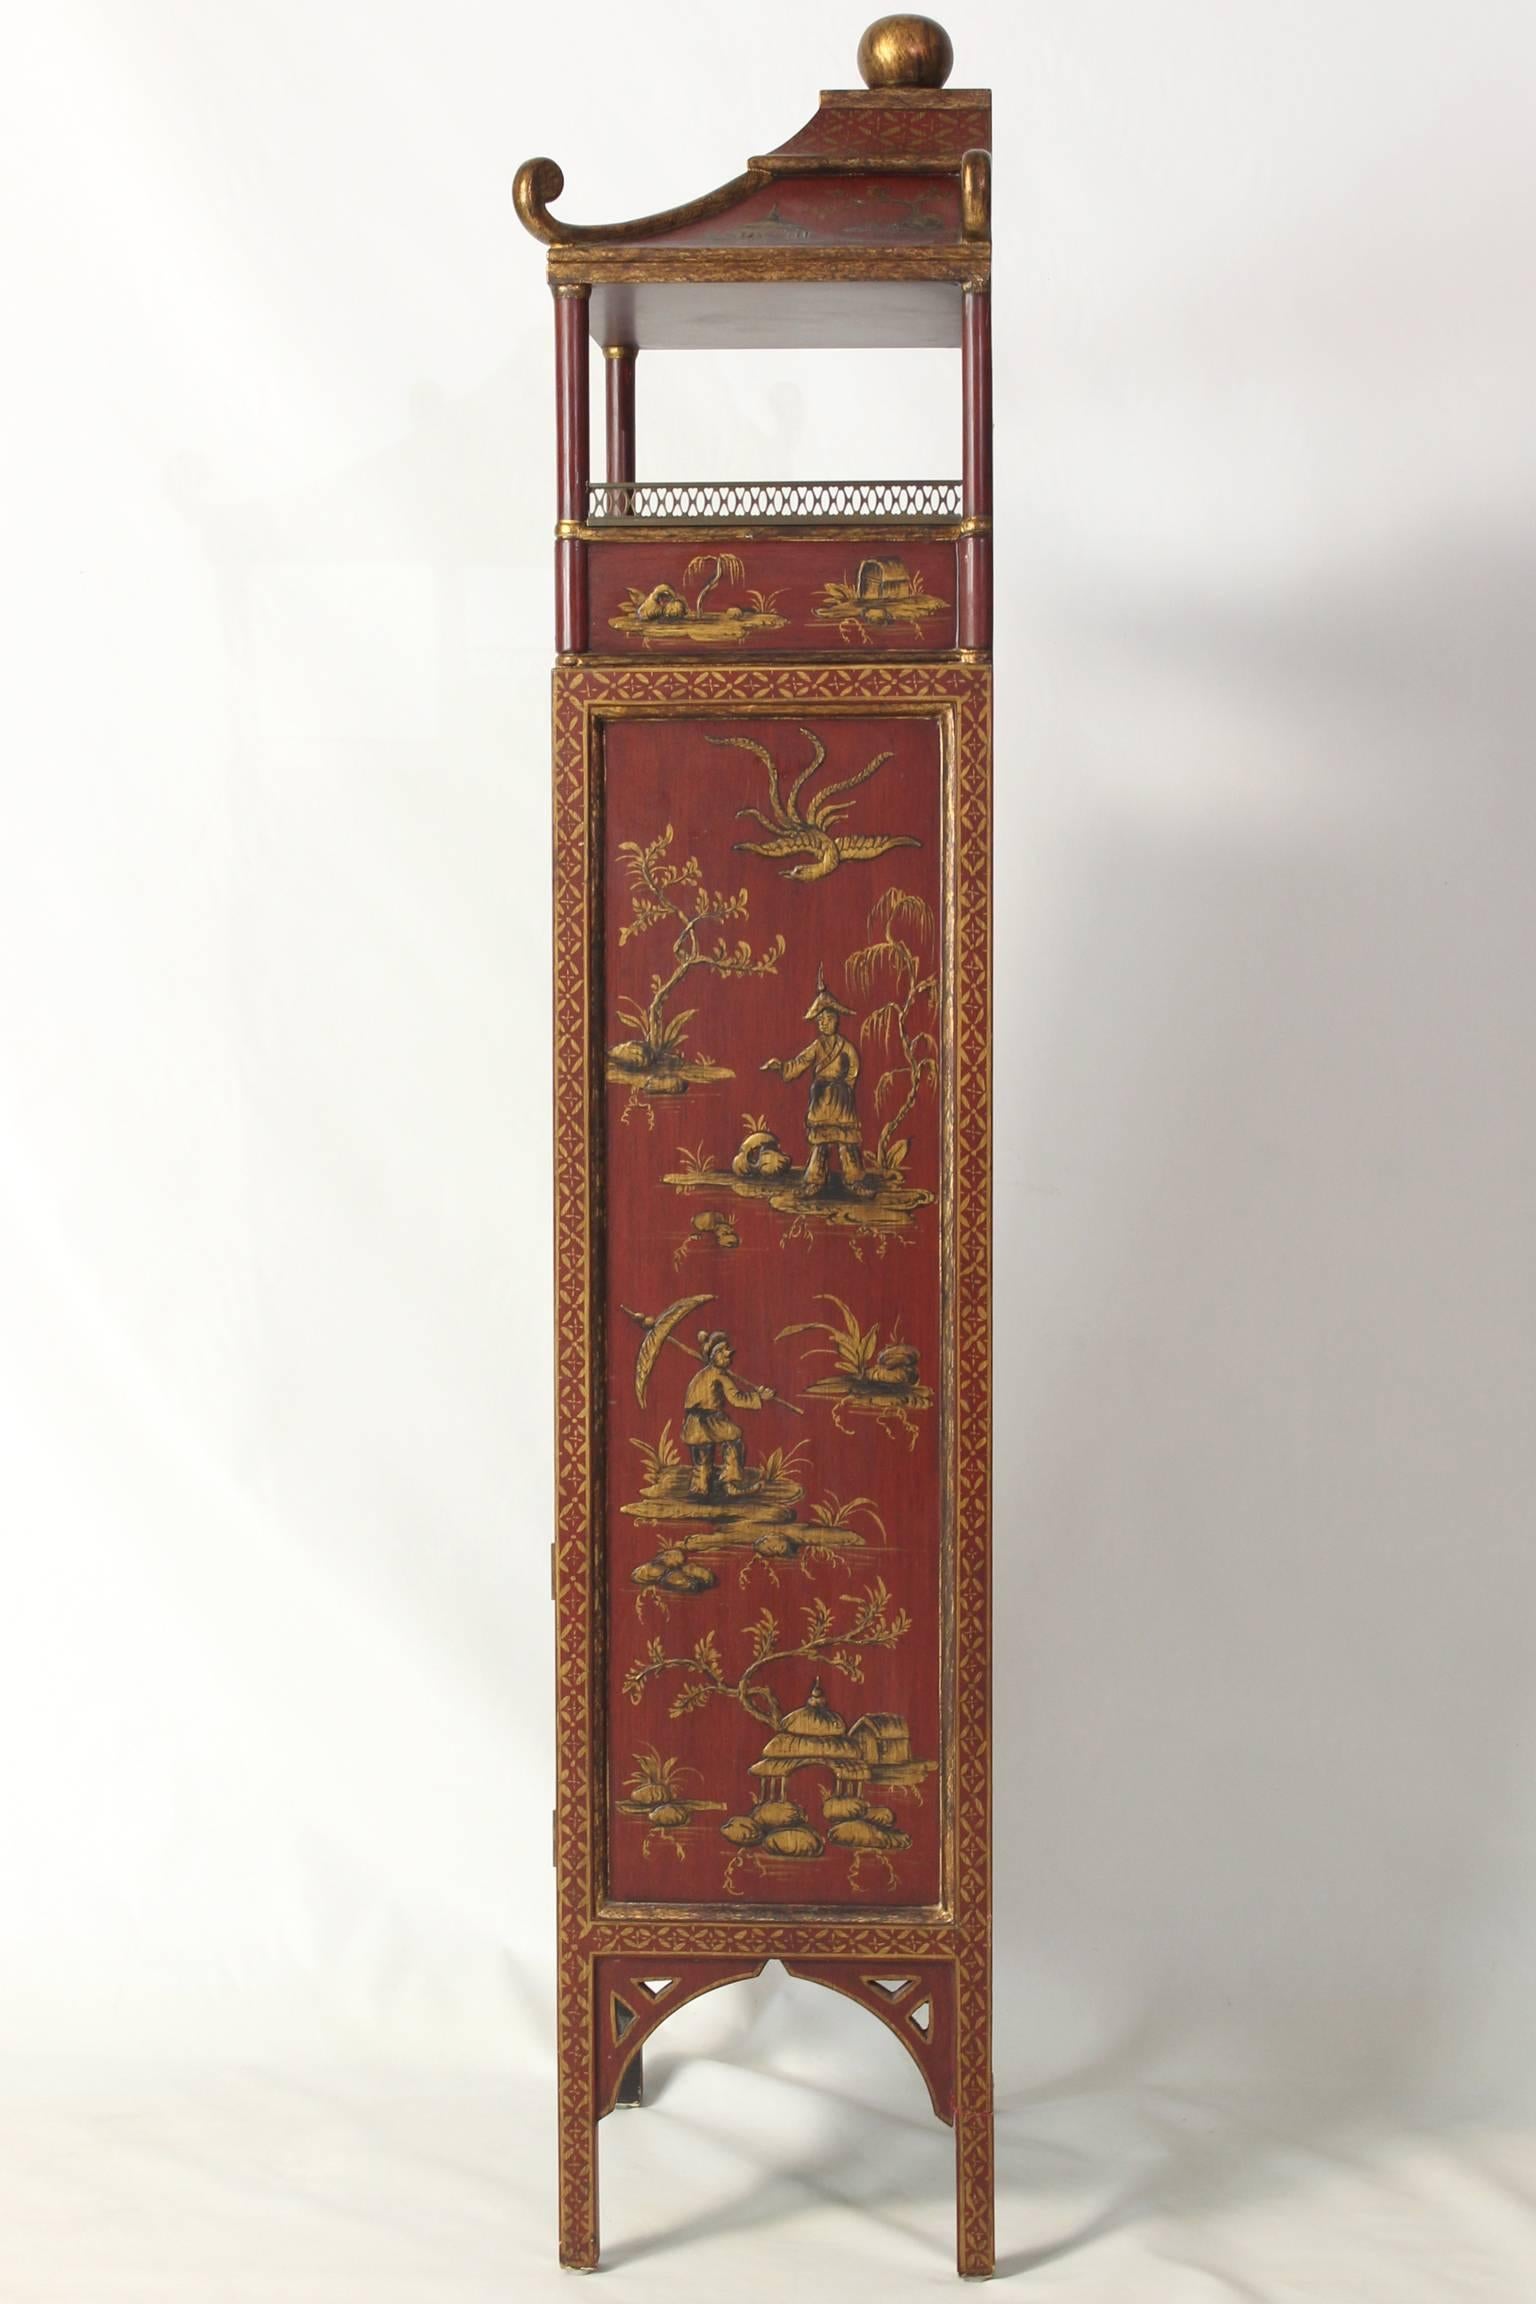 20th Century Chinoiserie Decorated Bookcase